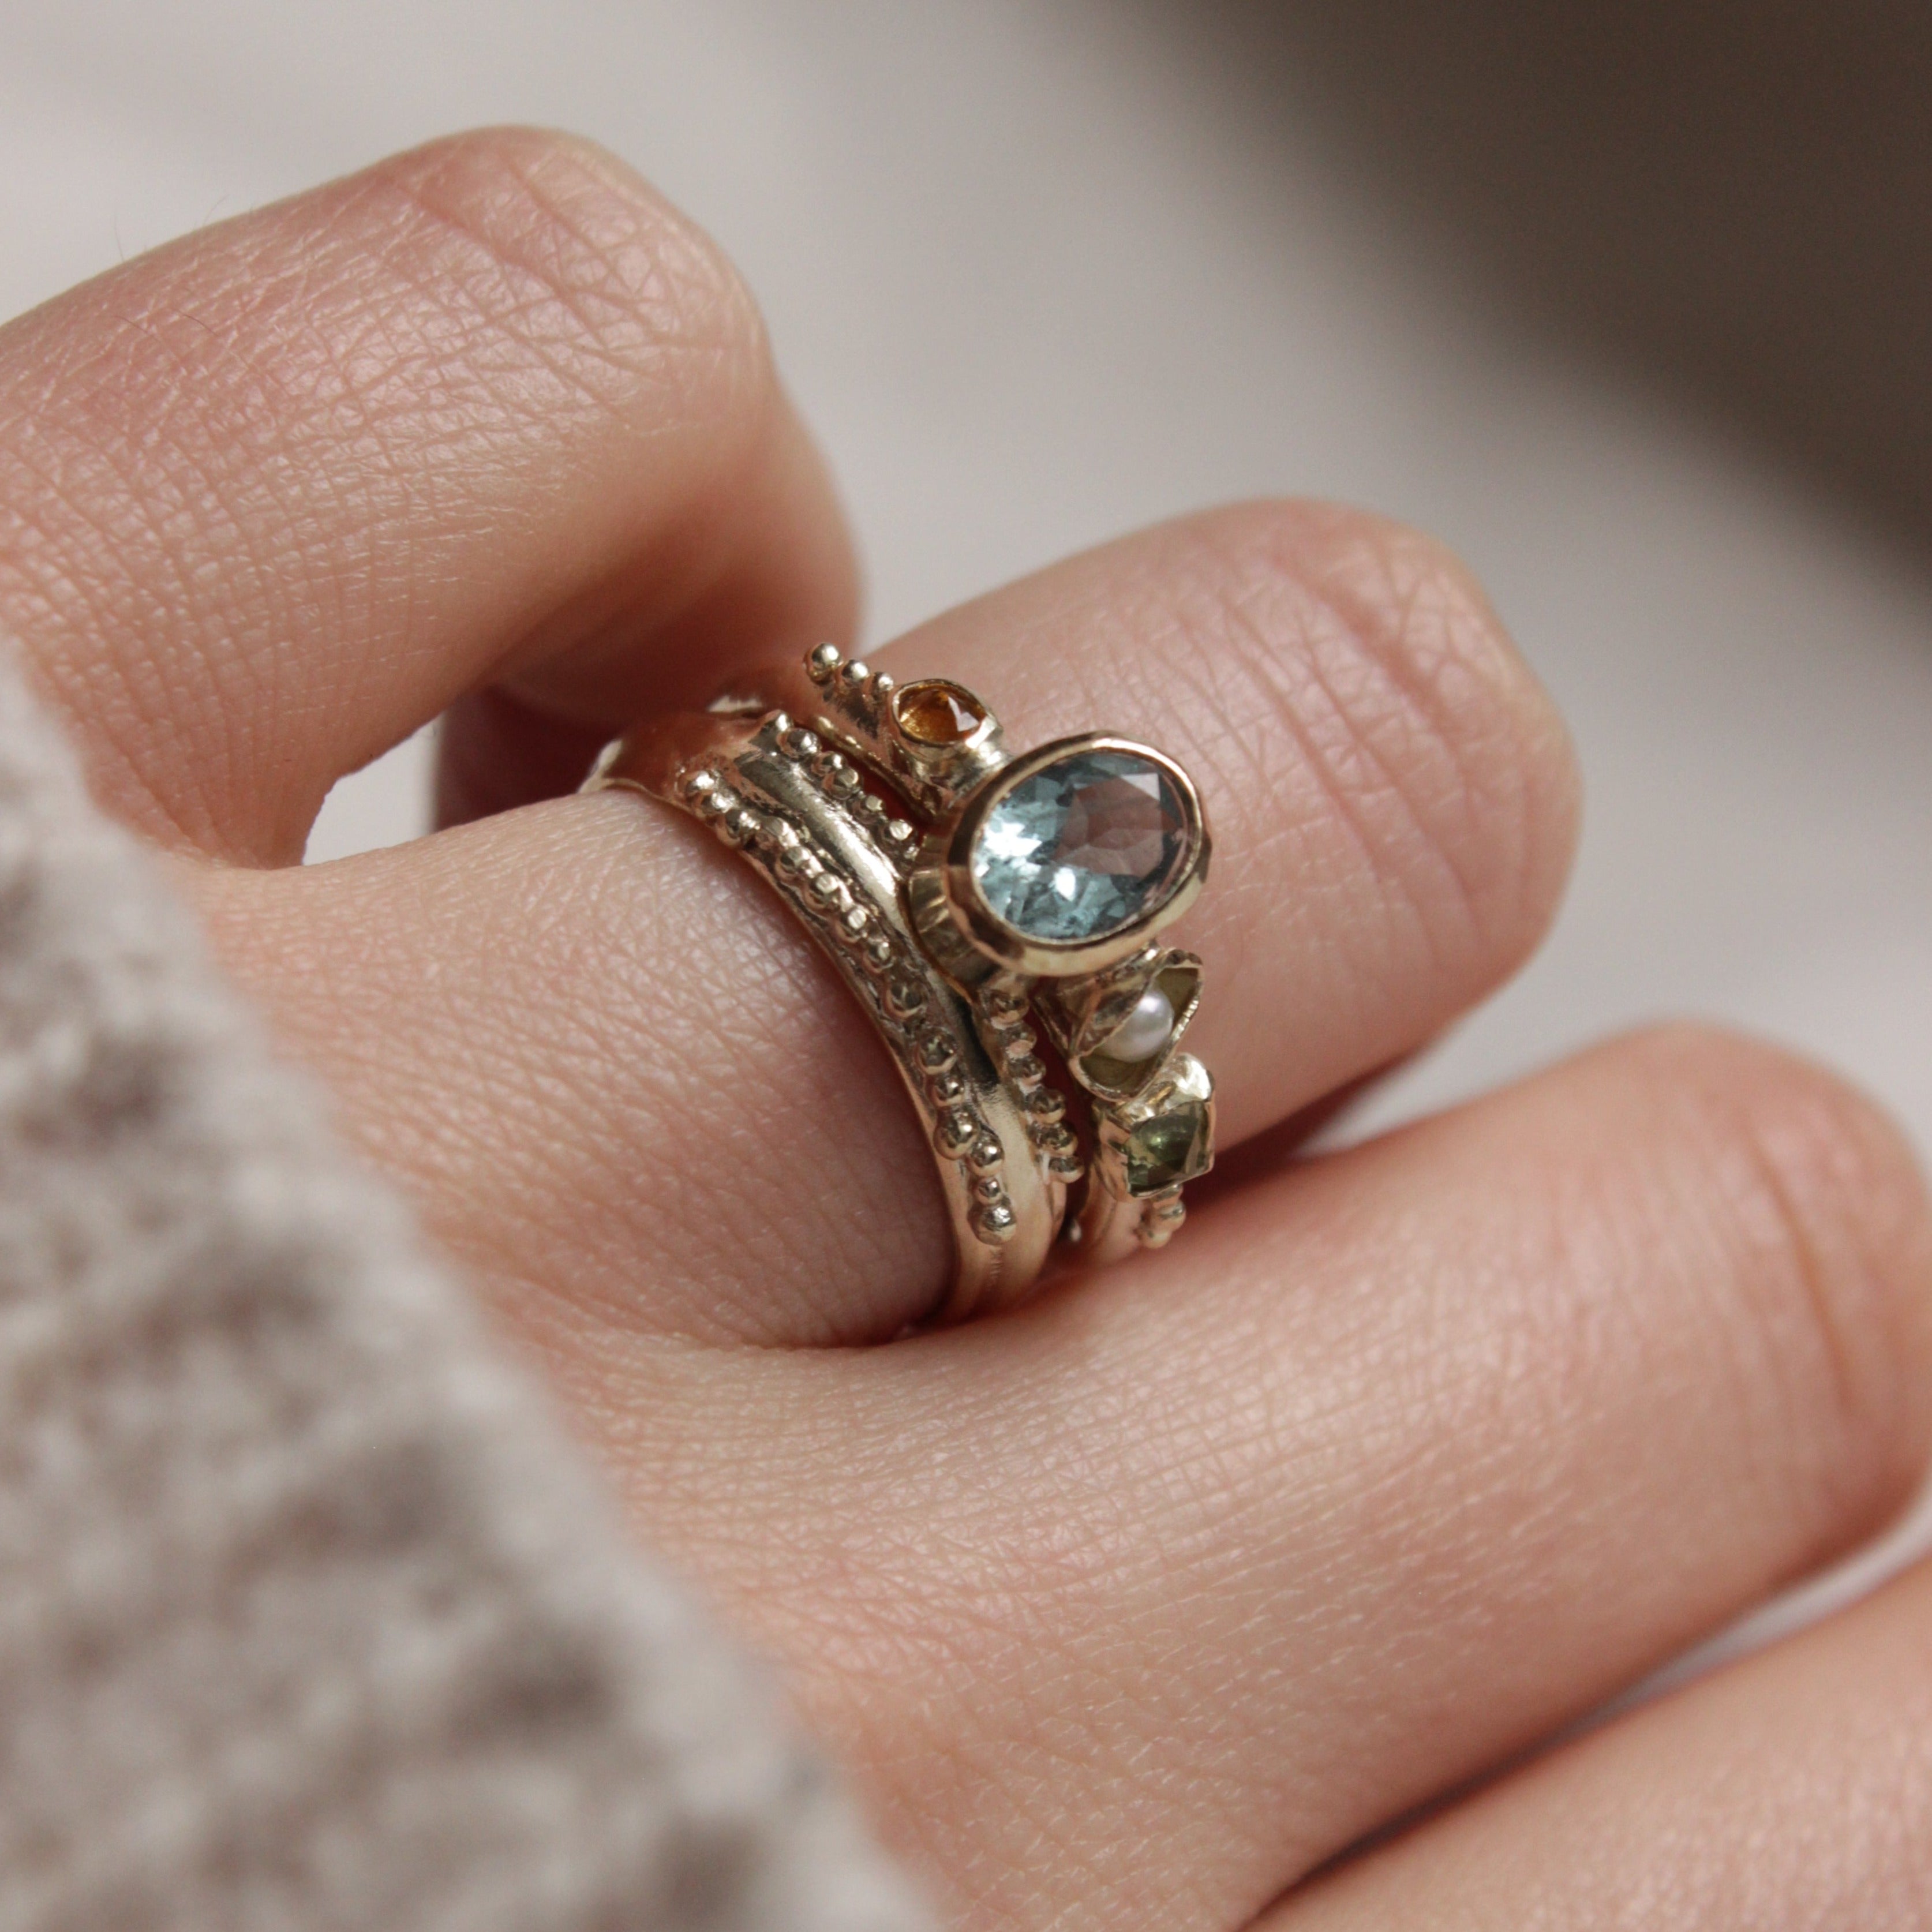 Bespoke, hand crafted 9ct gold alternative engagement ring. The ring features a vibrant oval Aquamarine, a pearl and sapphires. Handcrafted in Frome by Josie Mitchell Jewellery for the alternative bride and ocean lover. Worn with the Ancient wedding band.